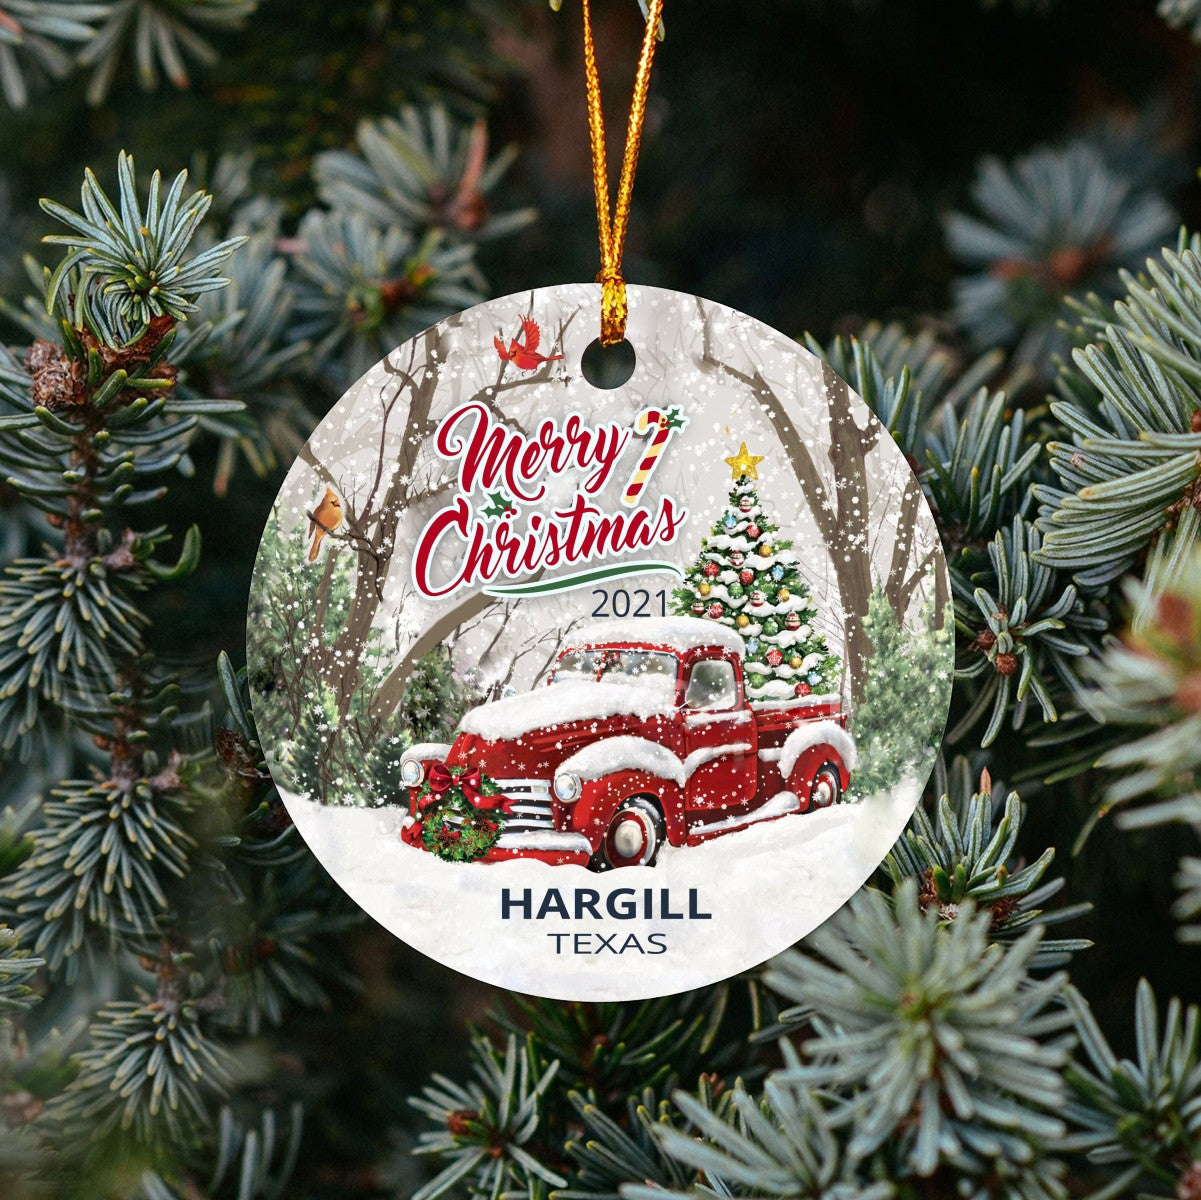 Christmas Tree Ornaments Hargill - Ornament With Name City, State Hargill Texas TX Ornament - Red Truck Xmas Ornaments 3'' Plastic Gift For Family, Friend And Housewarming